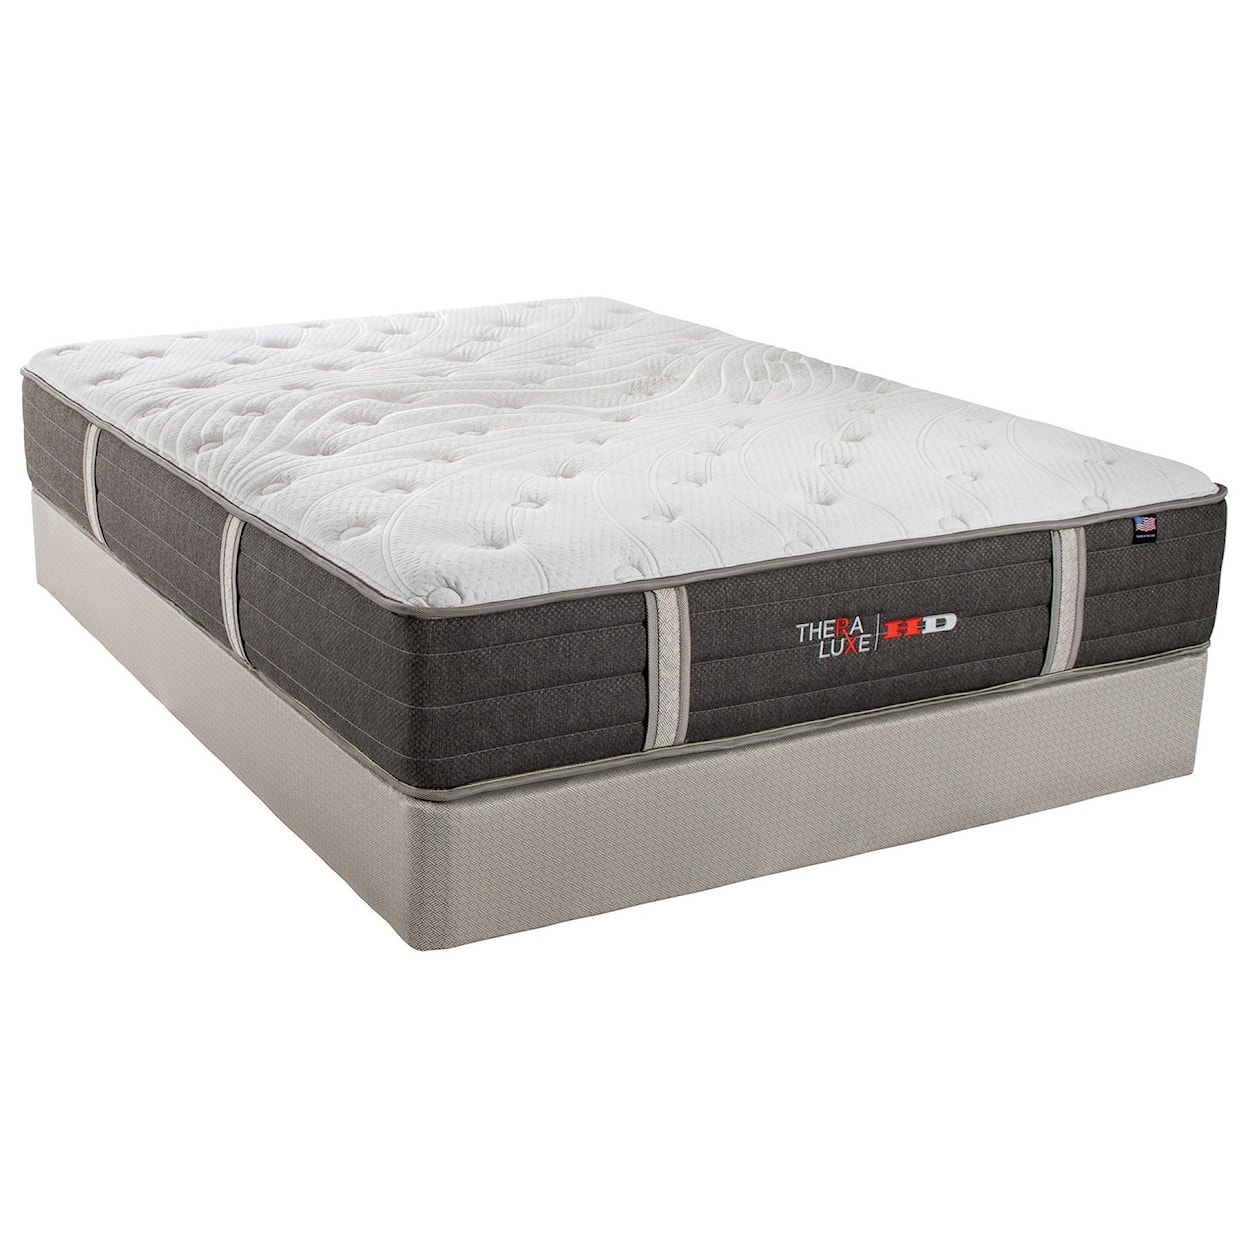 Therapedic Theraluxe Aspen Twin Firm Pocketed Coil Mattress Set